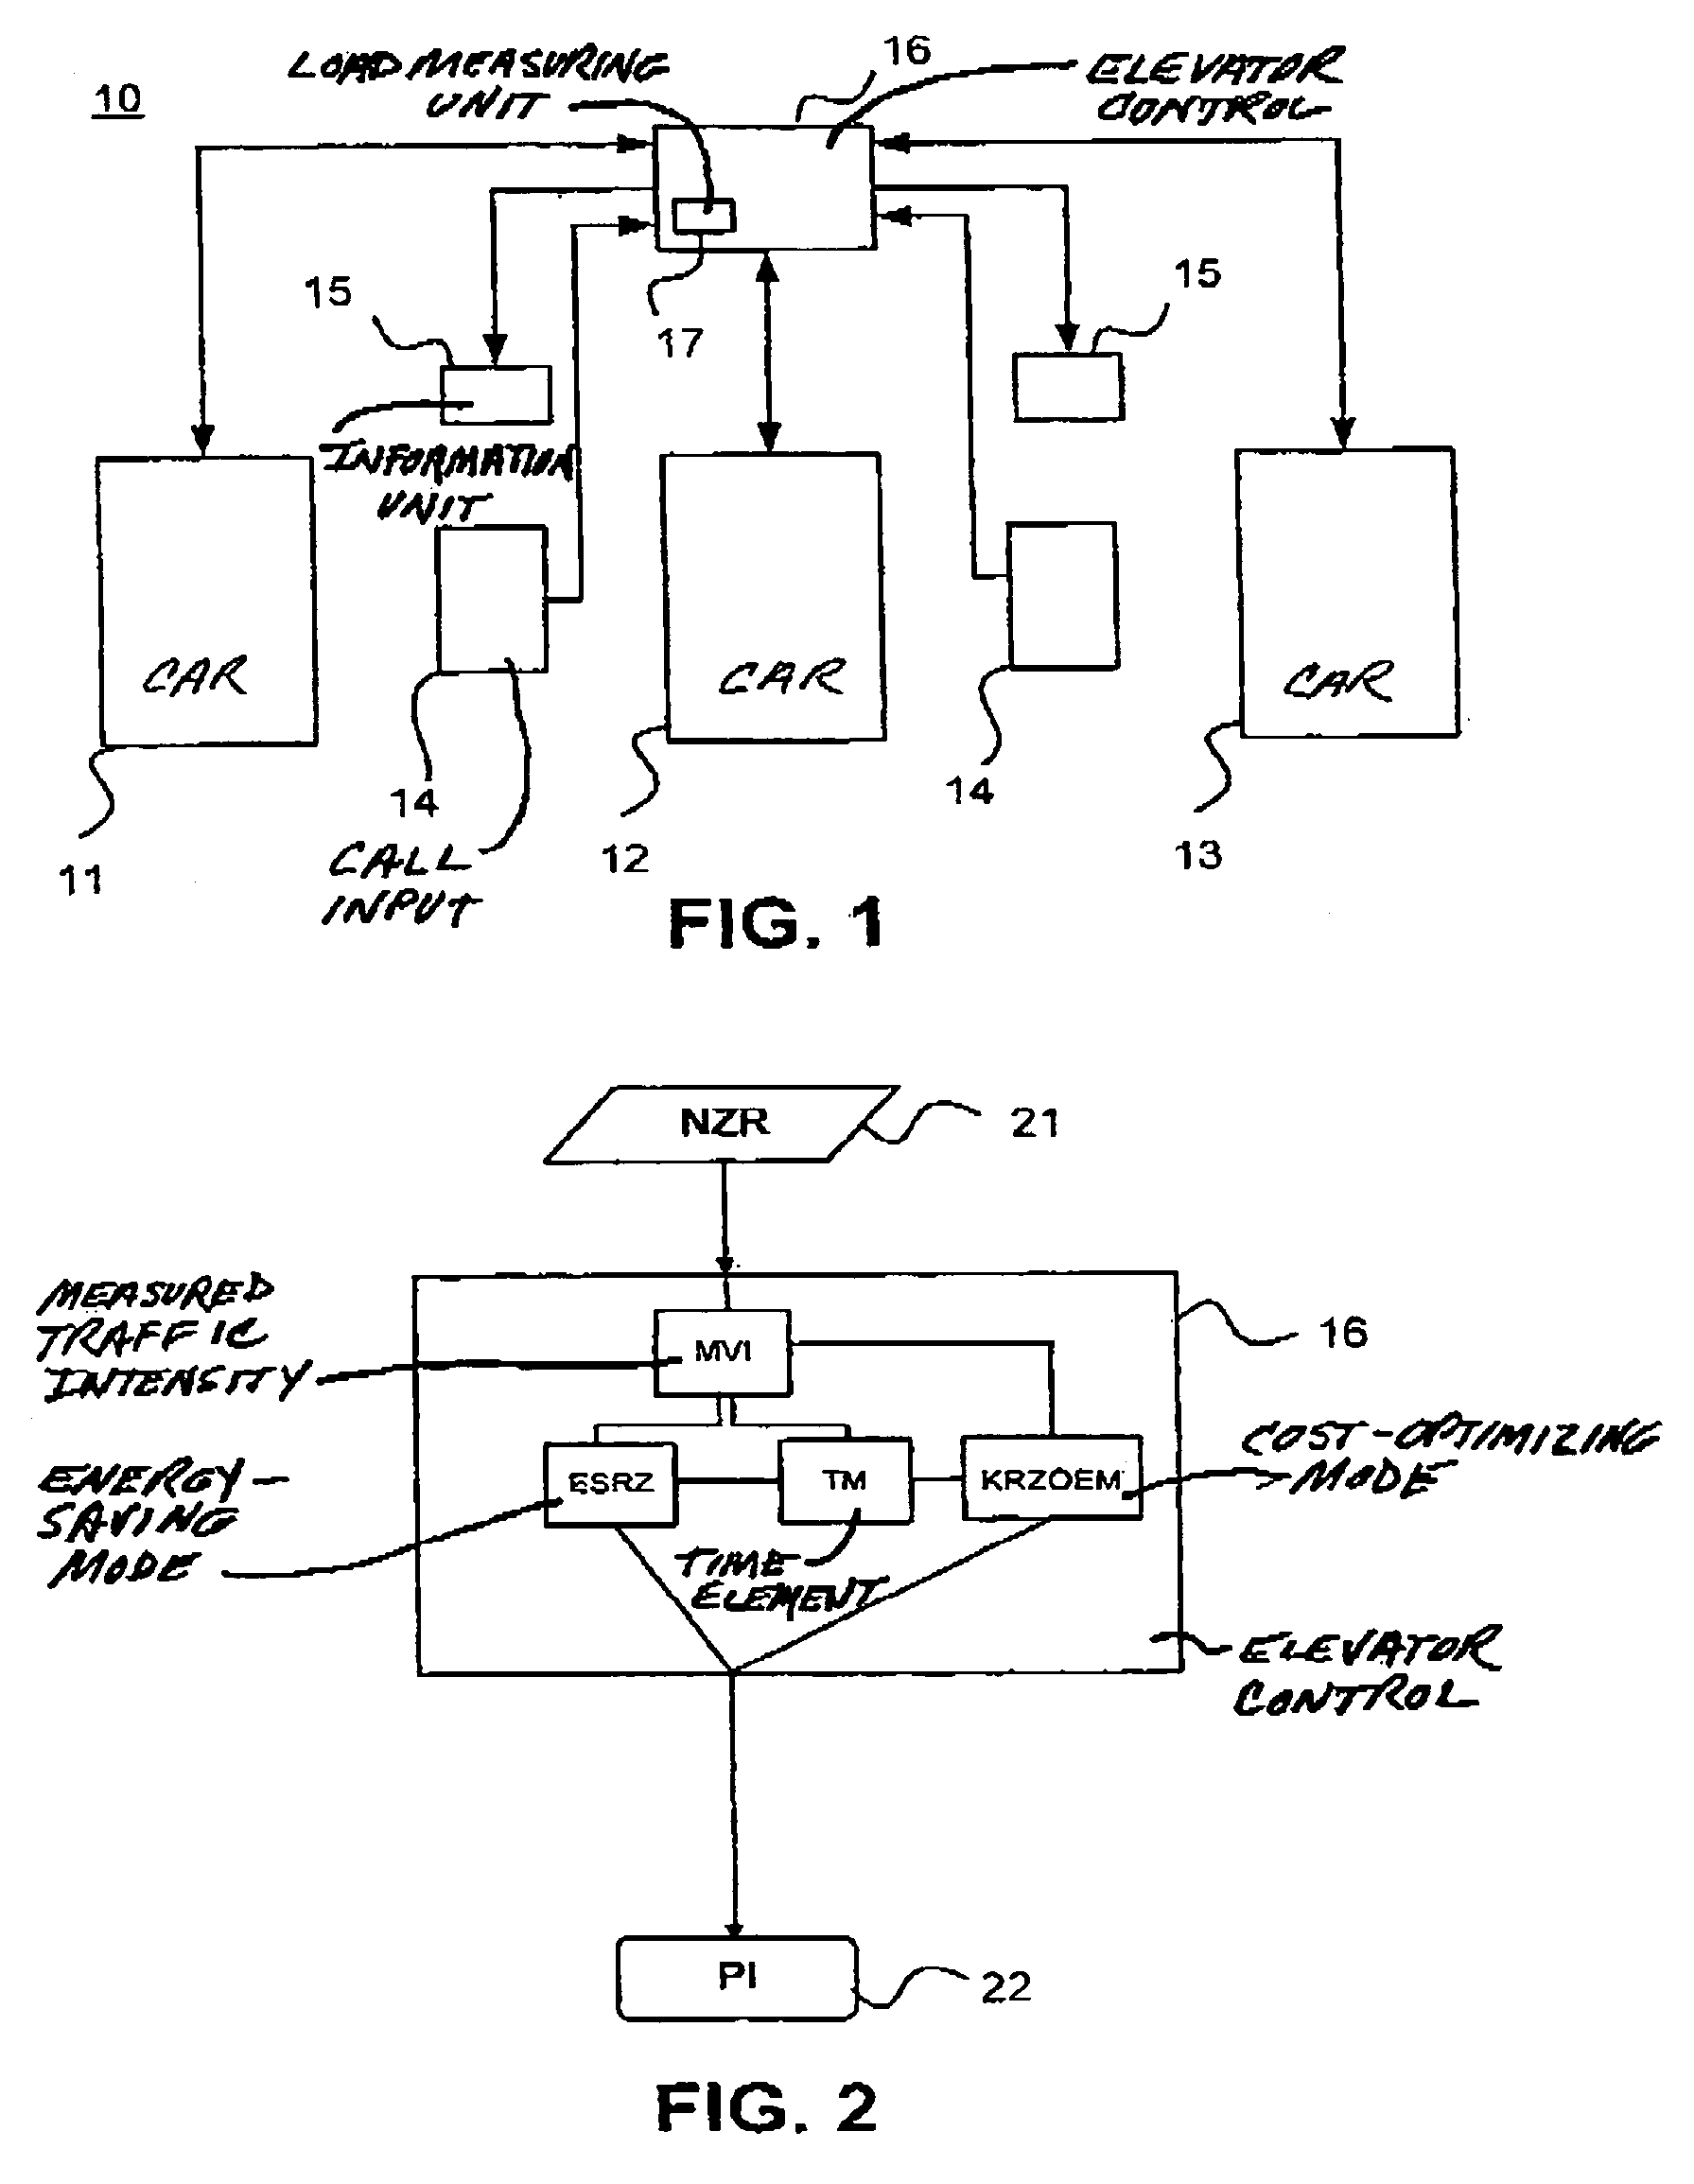 Method and apparatus for energy-saving elevator control